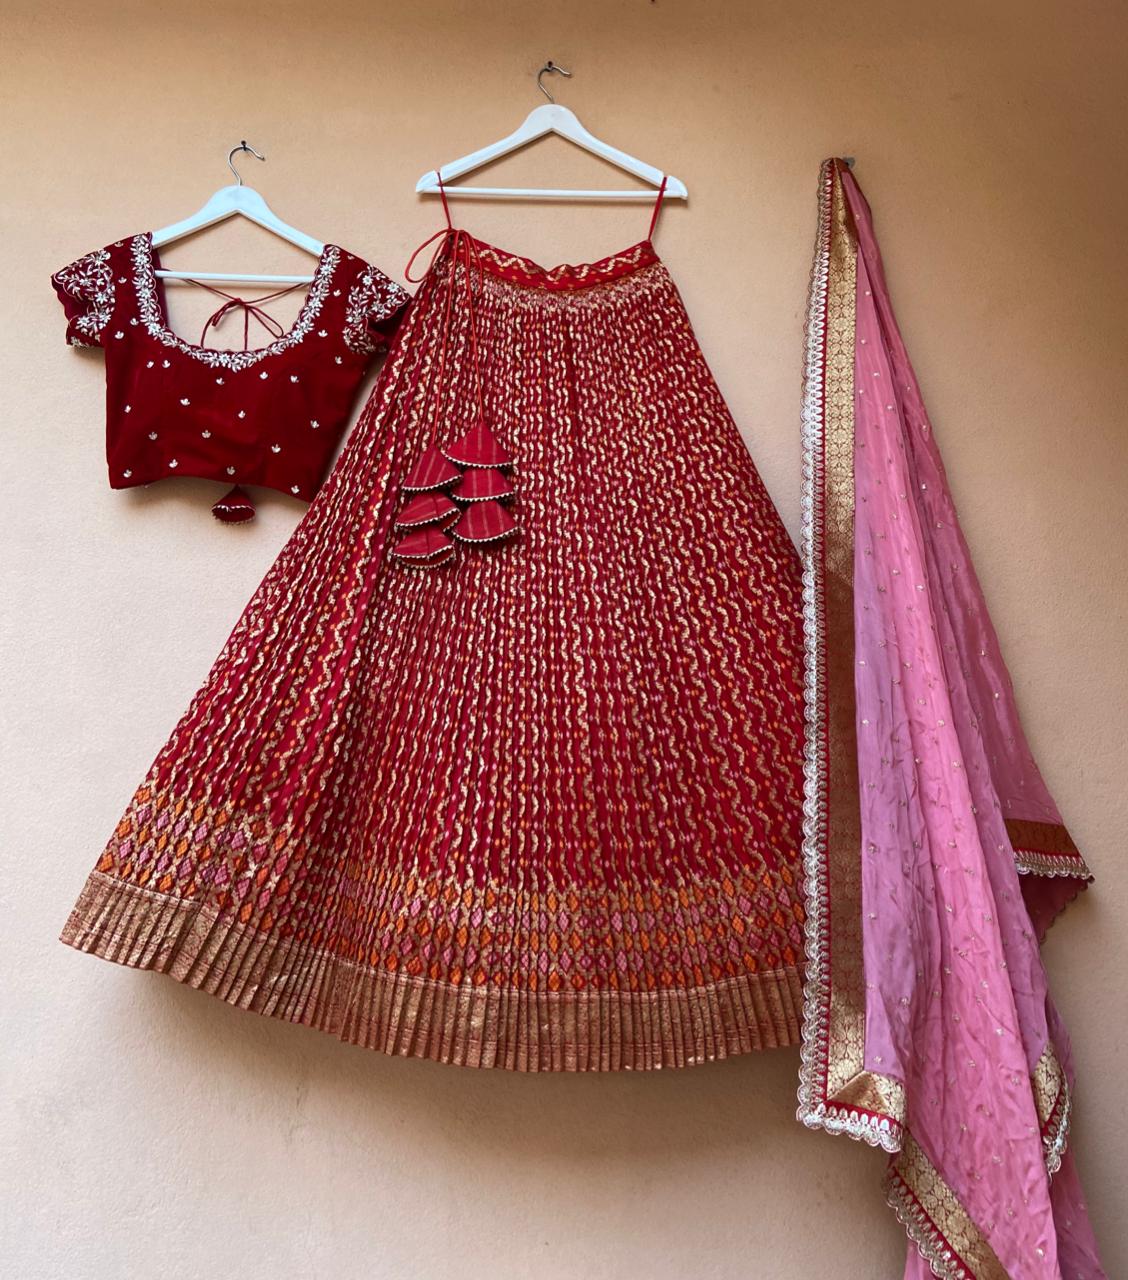 Bold Red Bandani Lehenga by myRiti, exemplifying rich red tone with elaborate Bandani patterns, ideal for making a statement at traditional events